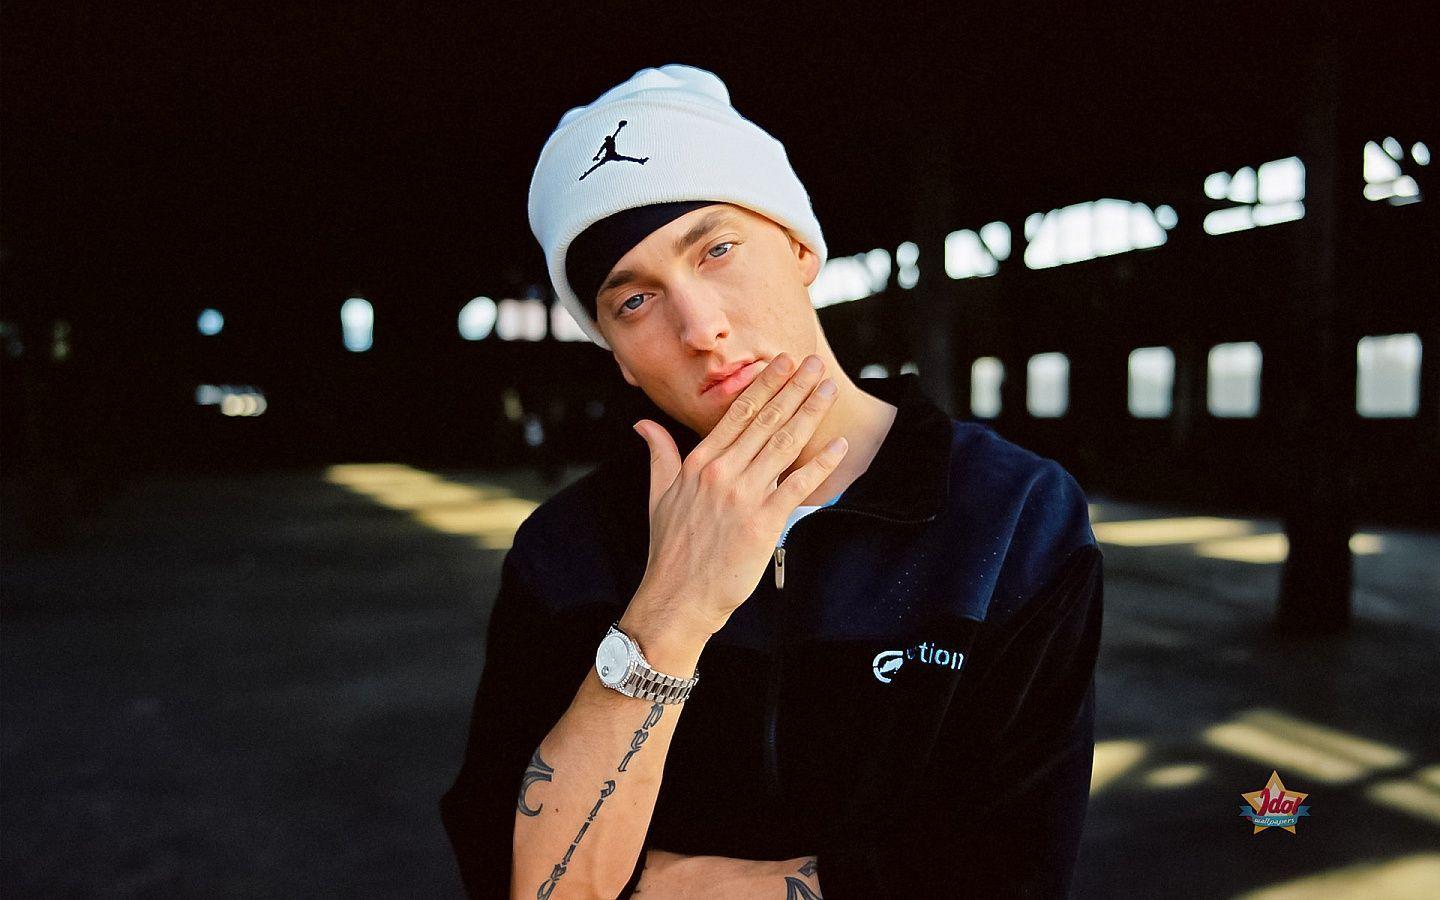 Download Eminem Every Every From Web Wallpaper. Full HD Wallpaper